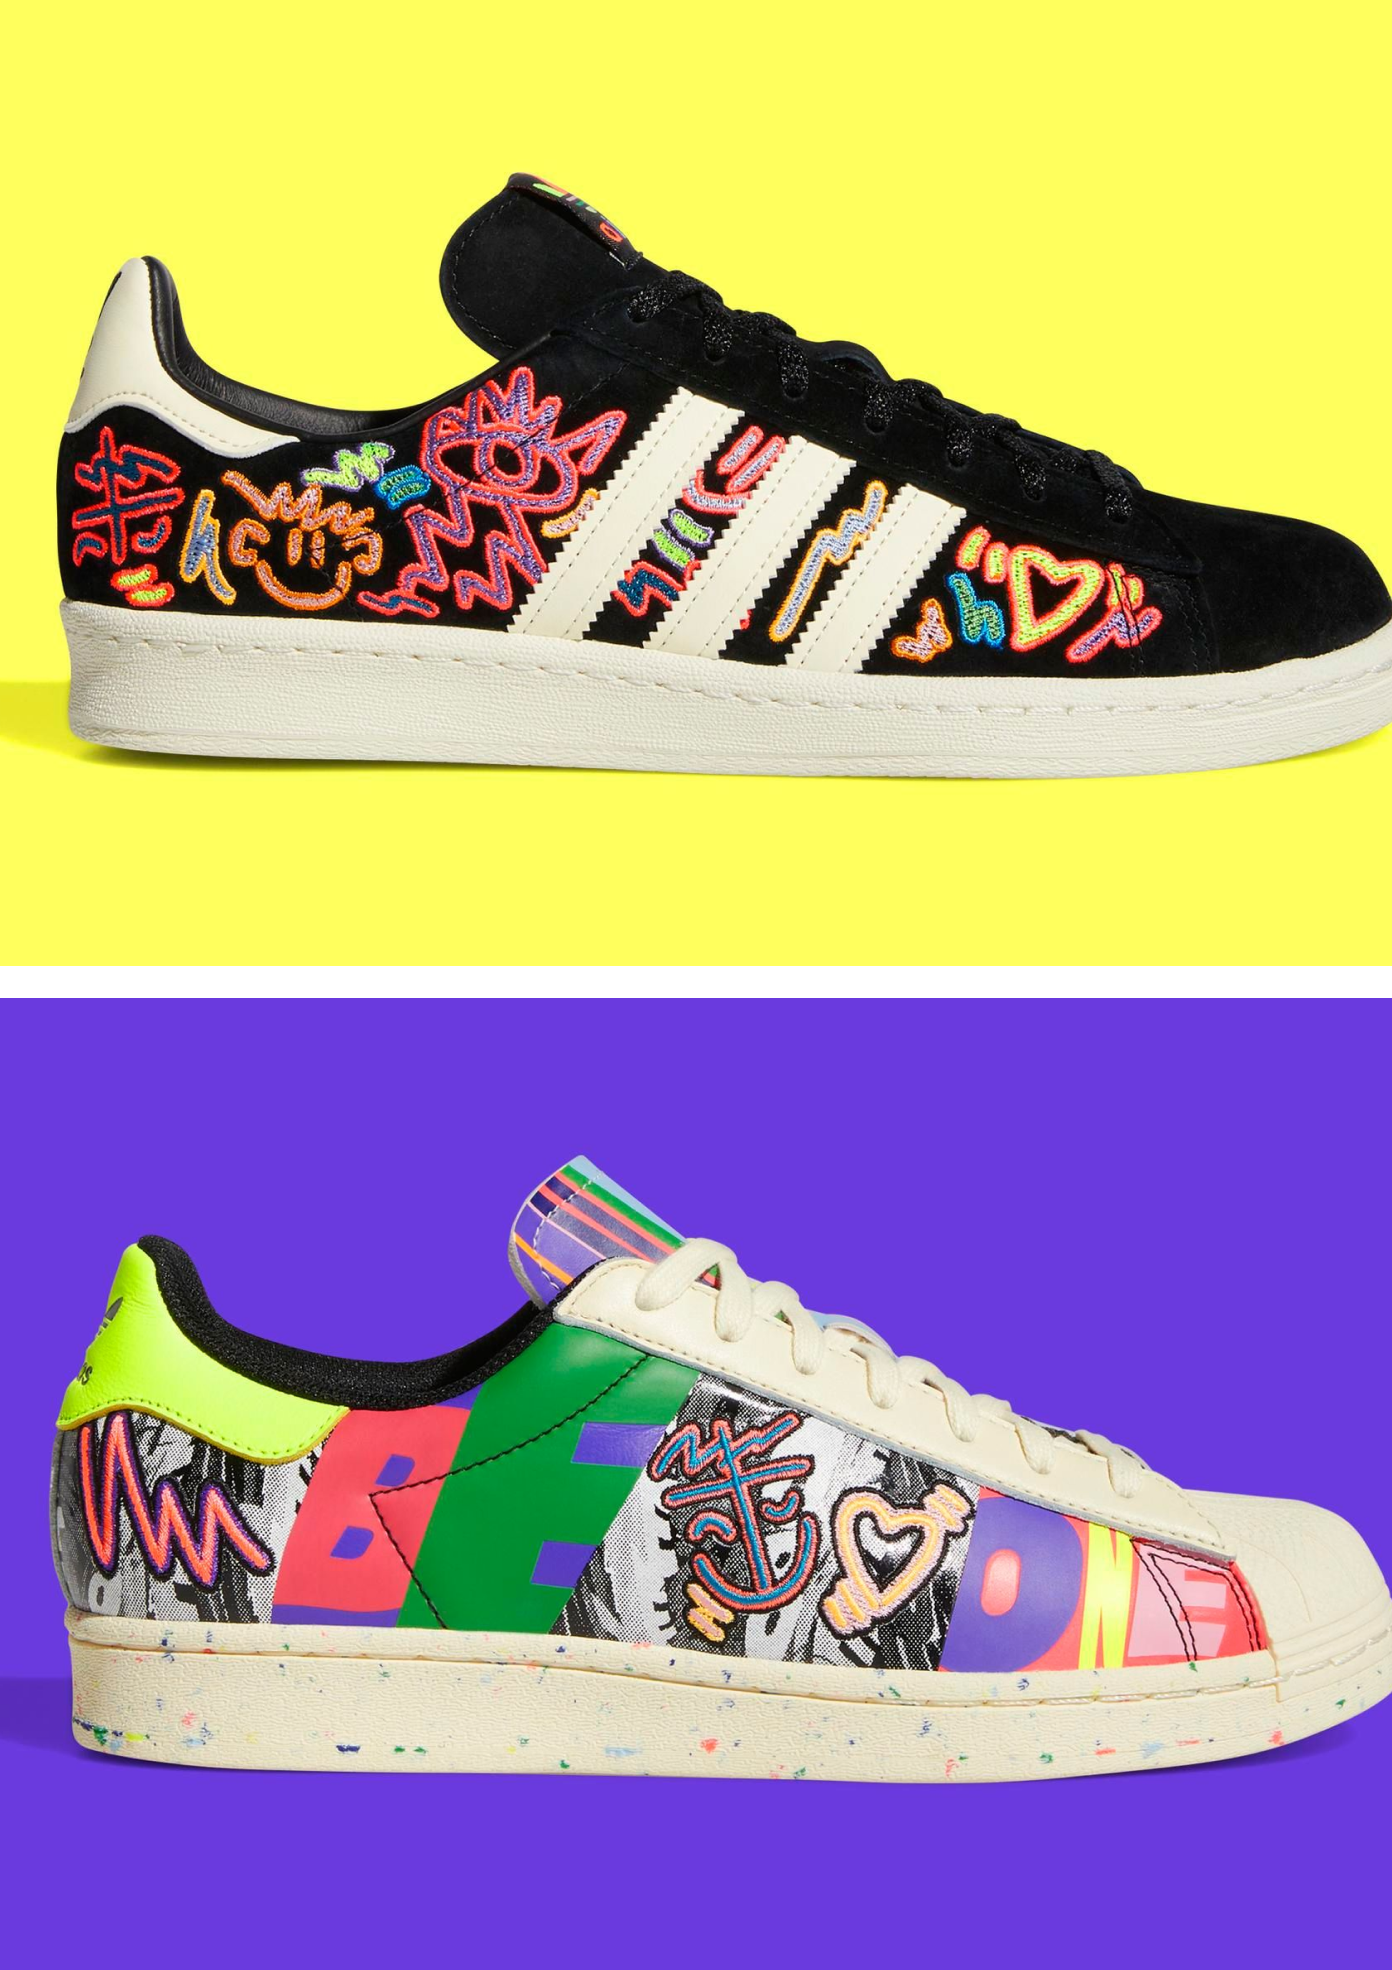 Two bright coloured sneakers artwork created by Kris Andrew Small for Adidas